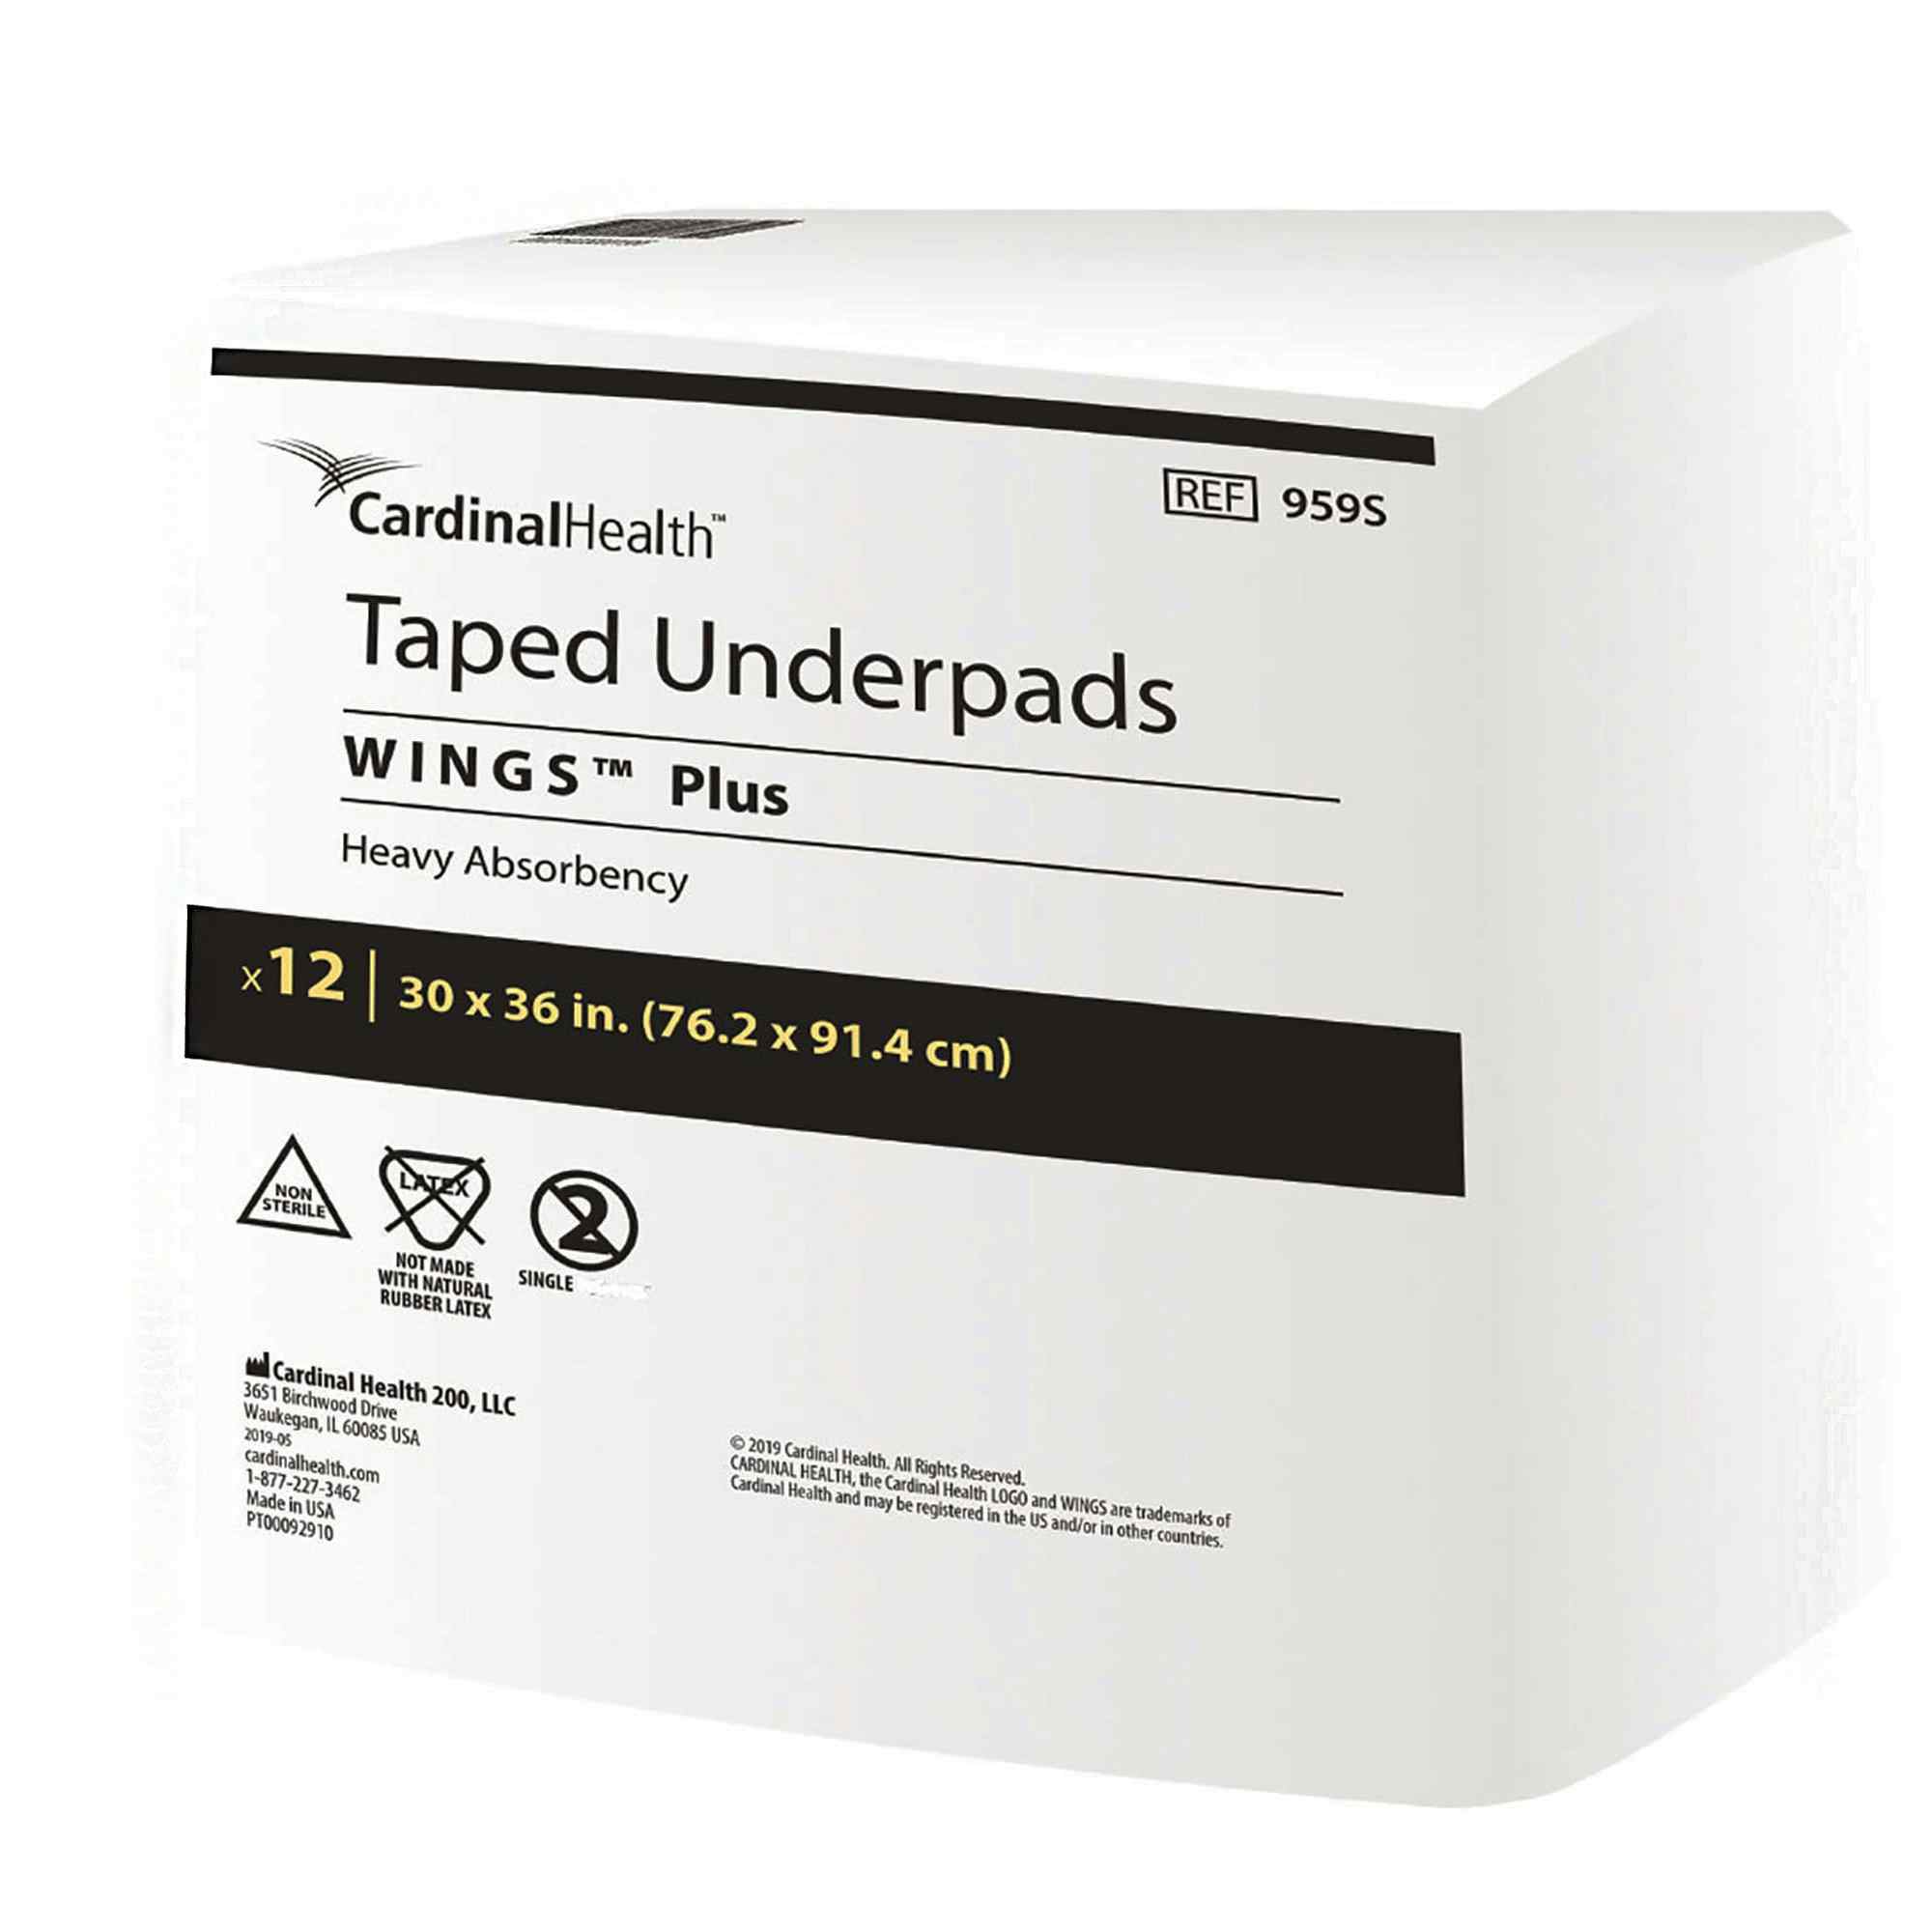 Wings Specialty Disposable Underpad, Heavy Absorbency, 959S, 30 X 36" - Bag of 12